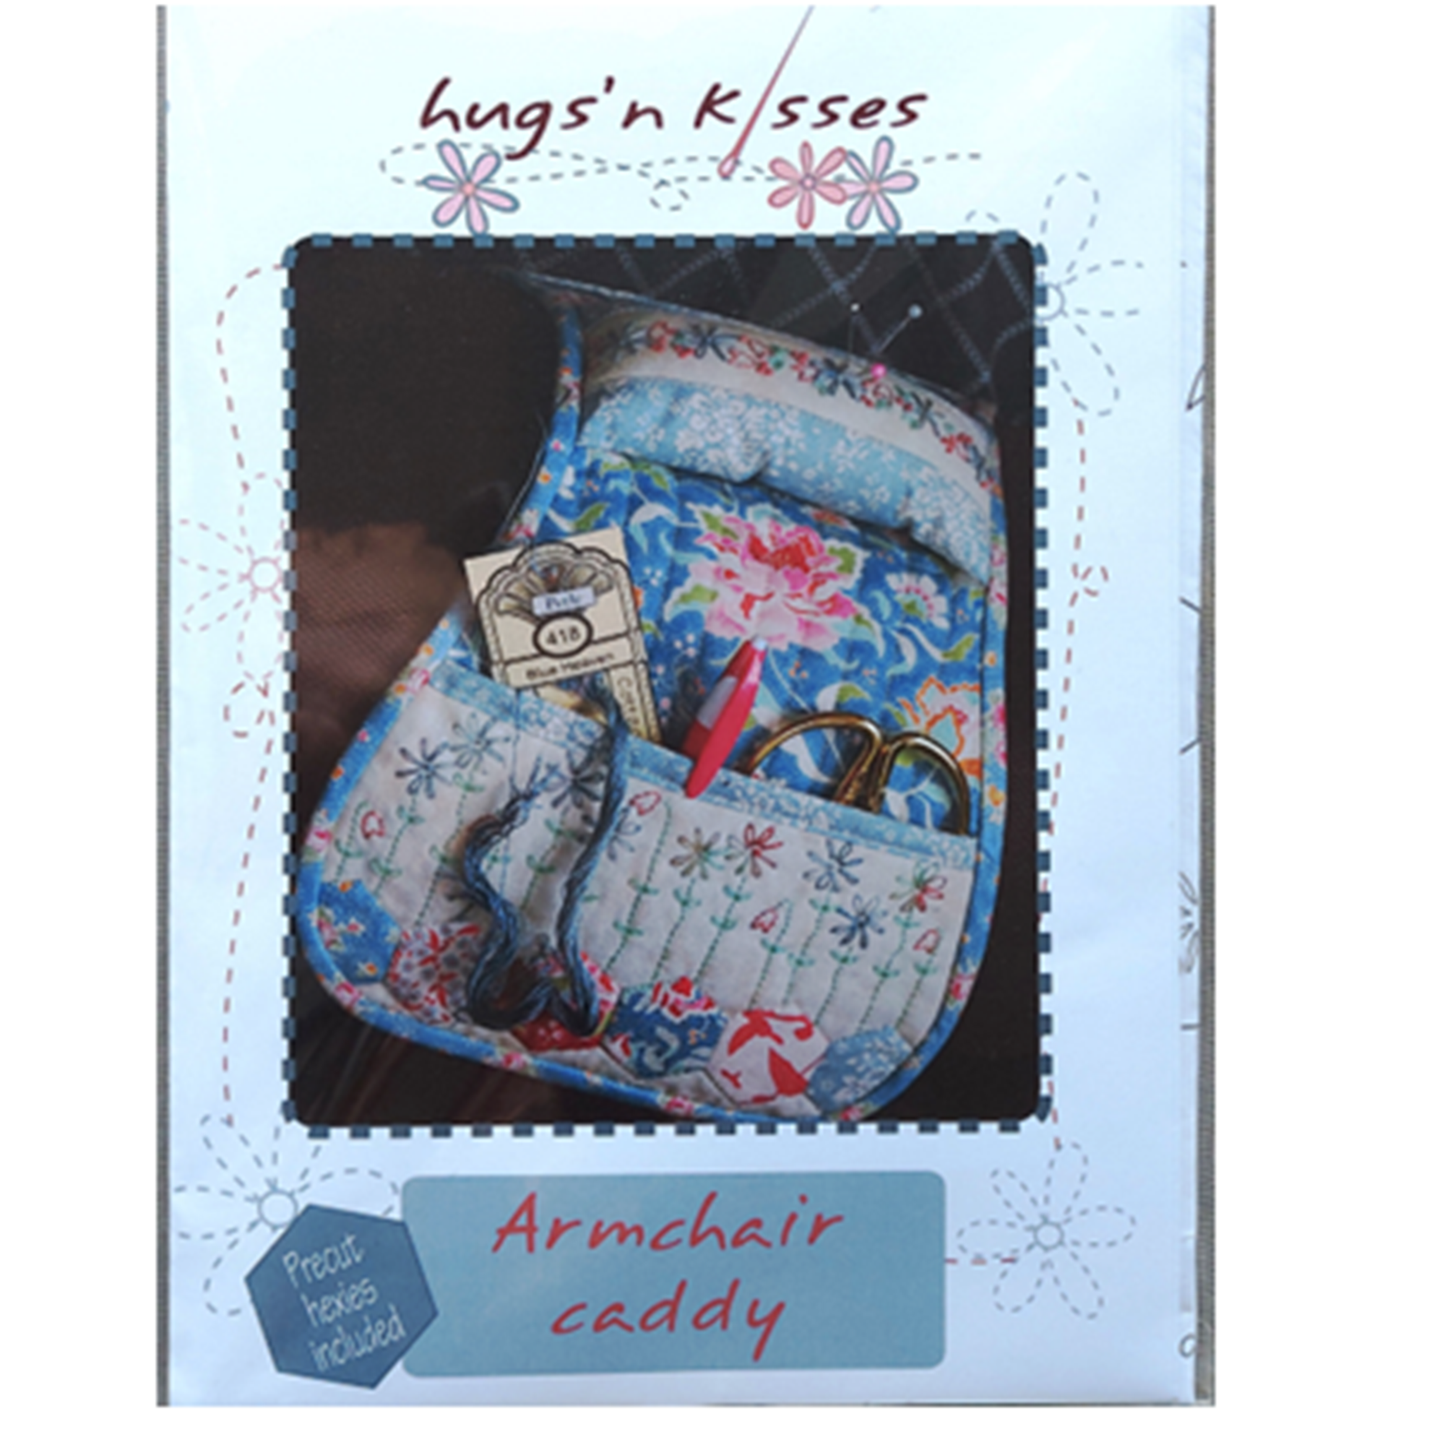 Armchair Caddy sewing supplies holder EPP embroidery Hugs 'N Kisses pattern